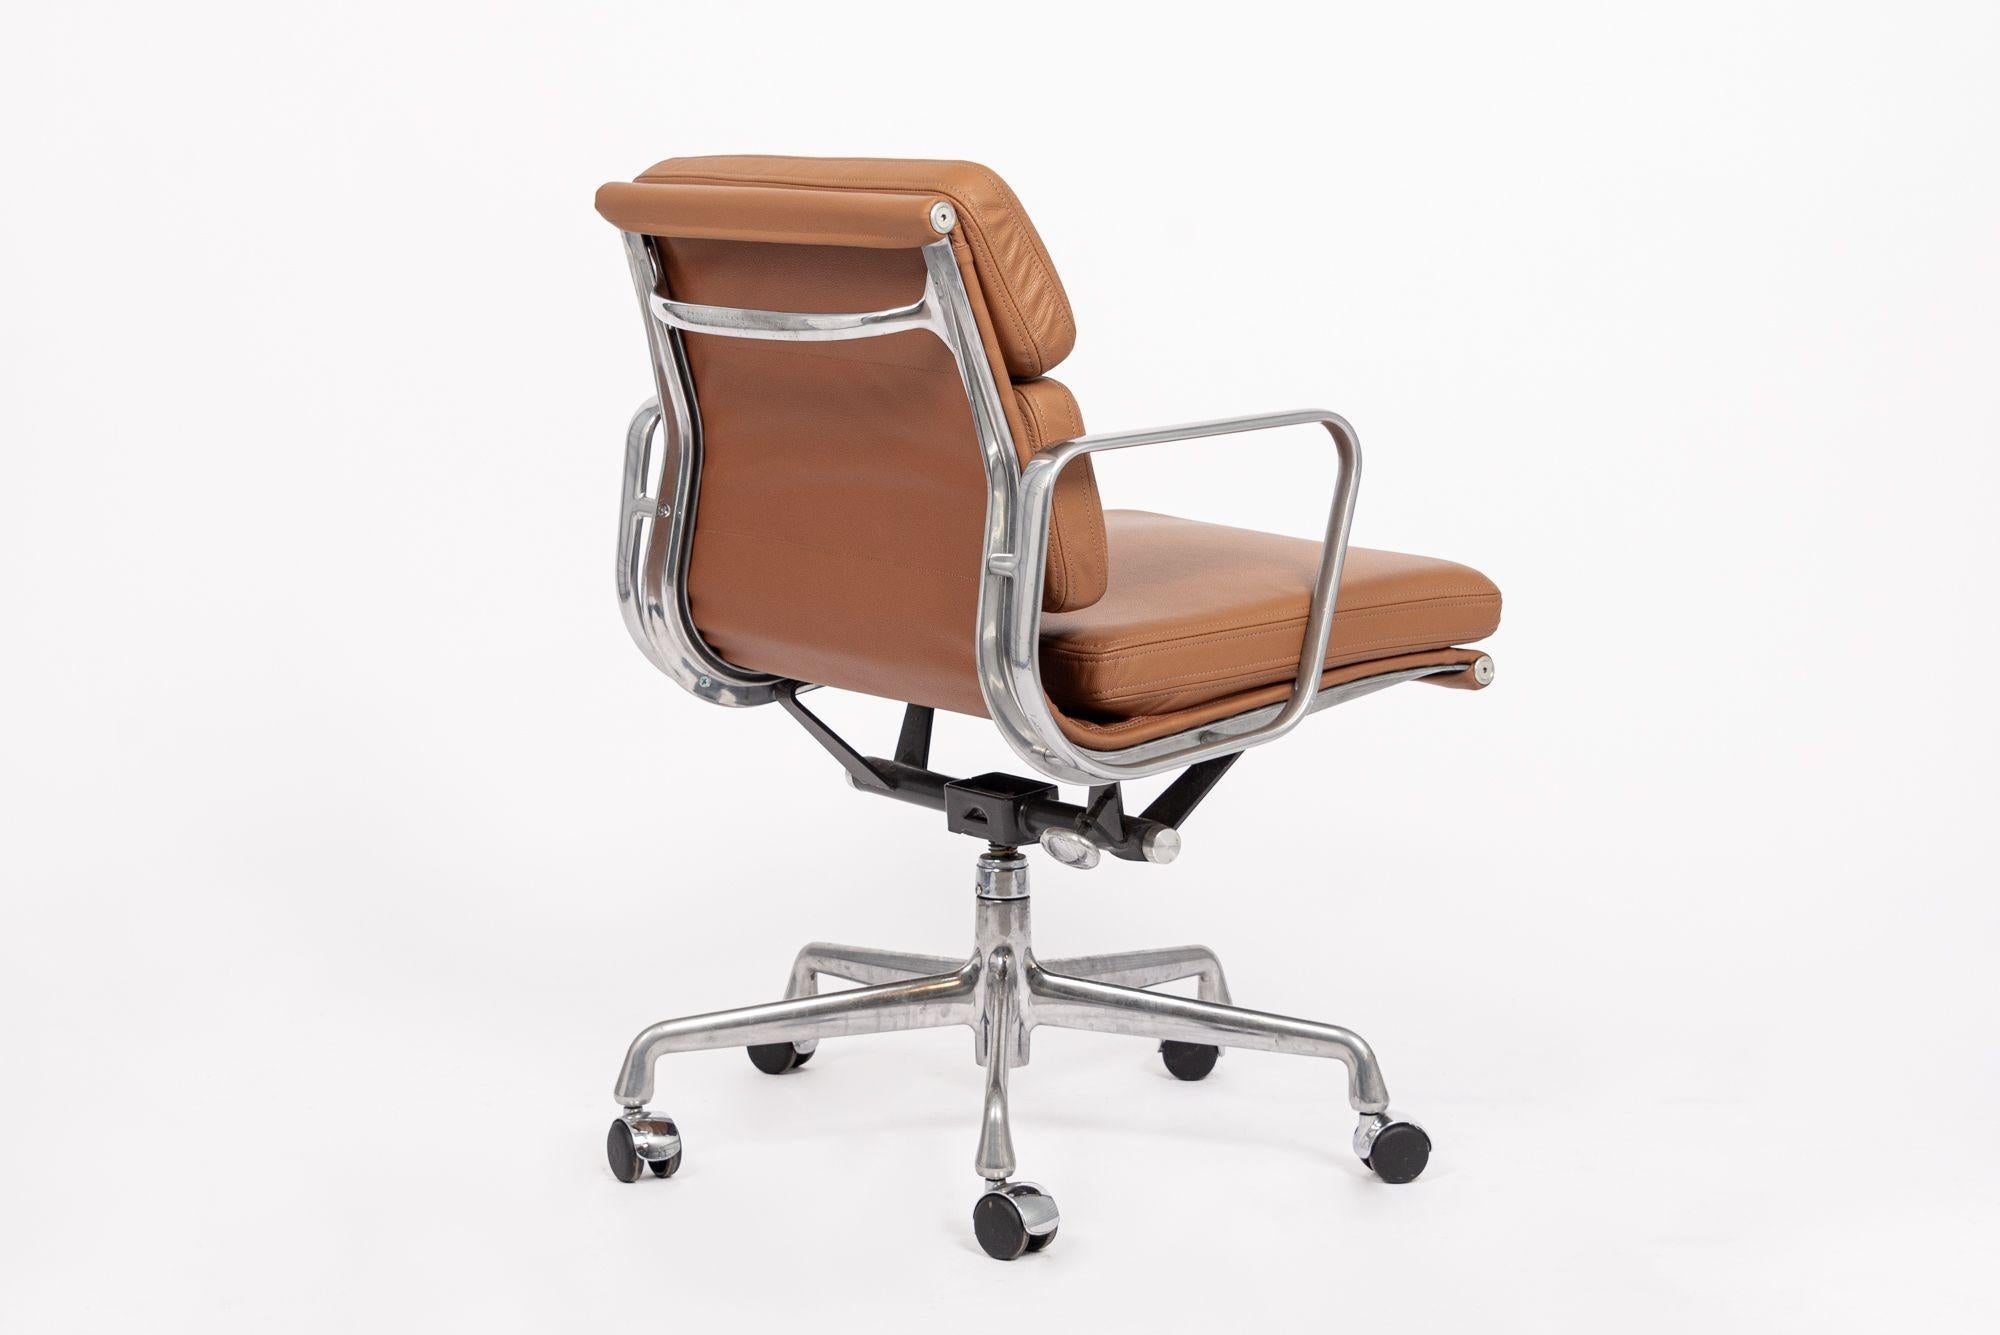 Aluminum Eames Herman Miller Brown Leather Desk Chair Soft Pad 2000s For Sale